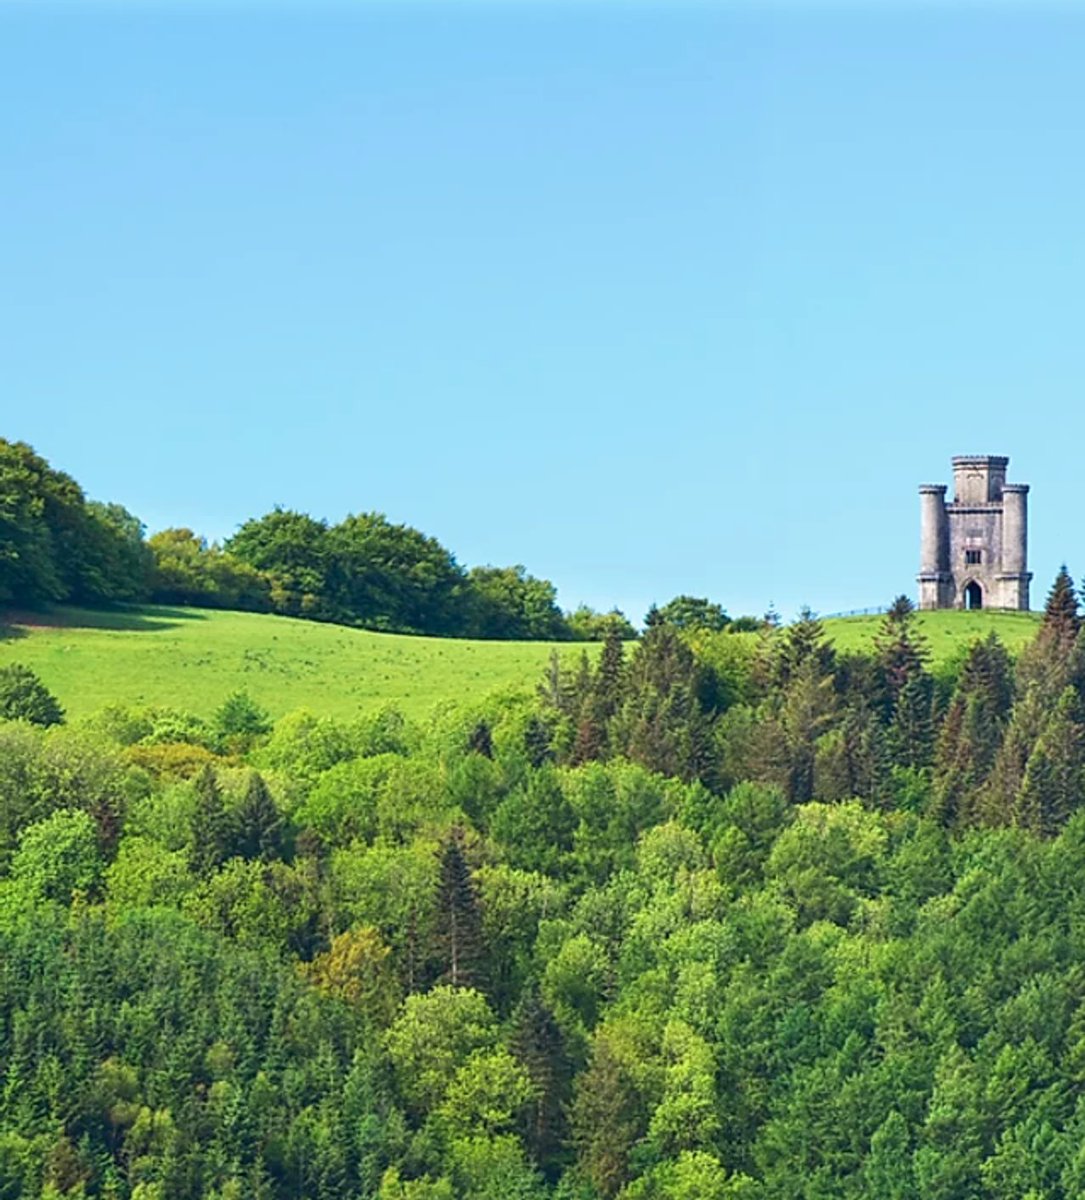 The reality is rather different:Built in 1805 by the wealthy Scottish businessman, and perched high above the village of Llanarthne, the majestic Paxton's Tower is, in fact, a folly designed to commemorate Admiral Horatio Nelson, and impress the people of the valley.